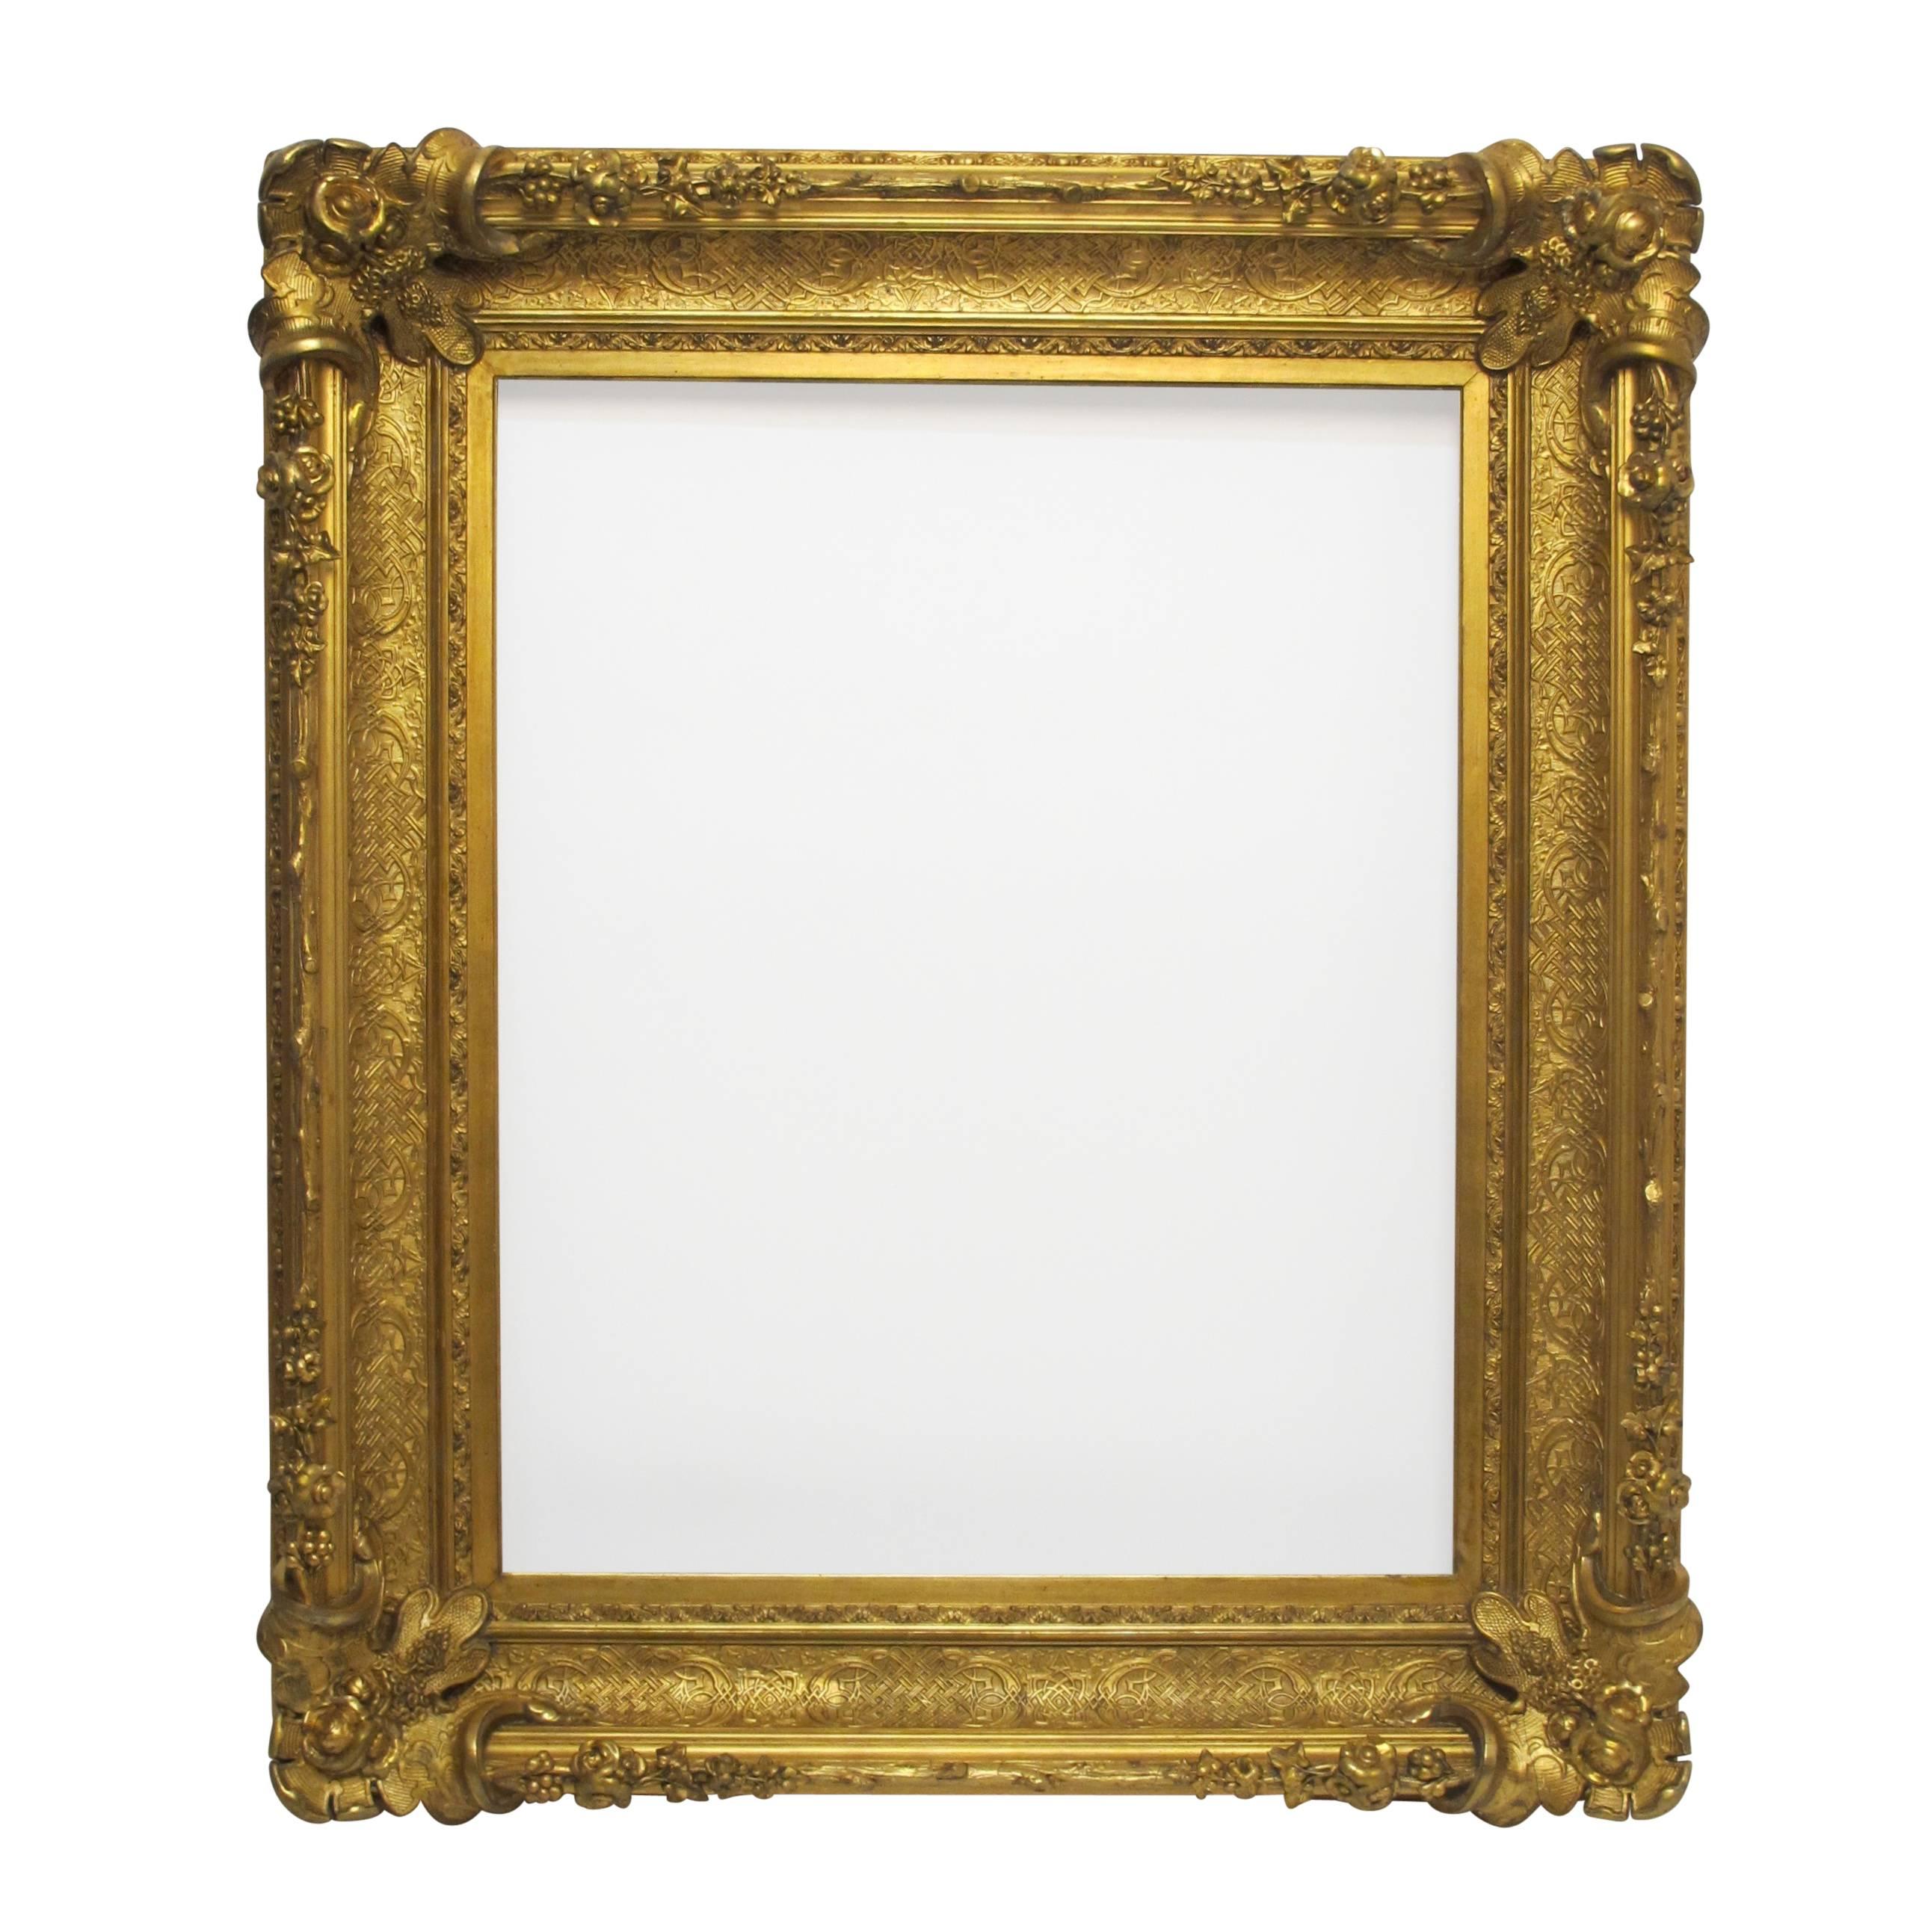 A 19th century custom made museum quality frame. Highly carved and embellished gilt plaster over wood frame.
The interior or sight measurements are 28.5 inches high x 36 inches wide.